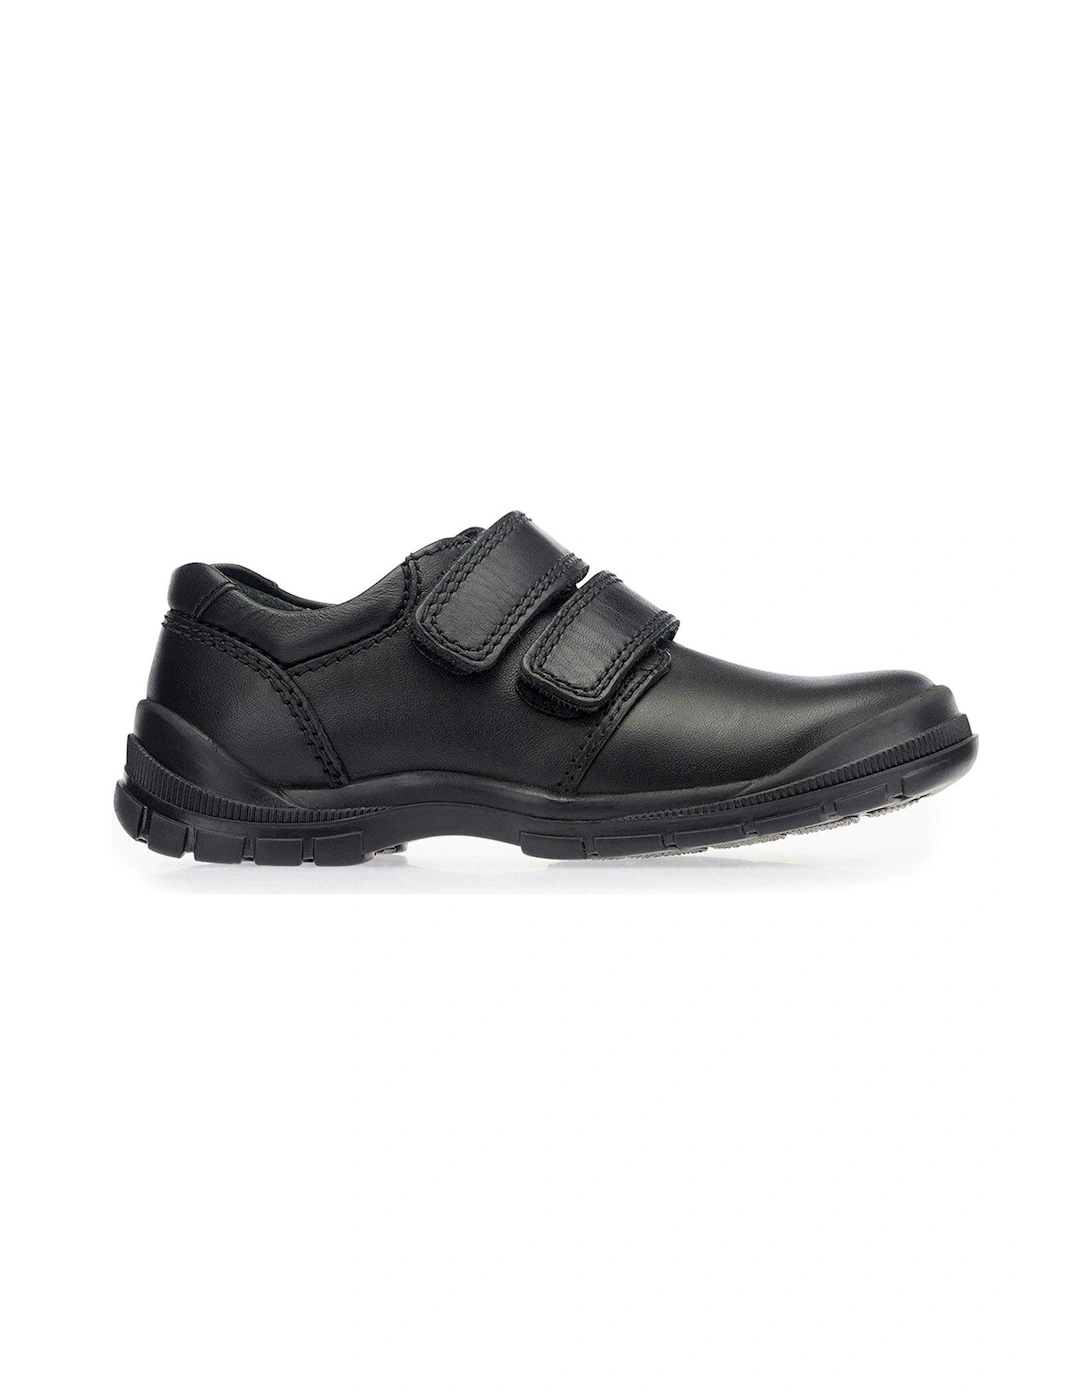 Engineer Black Leather Rip Tape Smart Boys School Shoes, 2 of 1